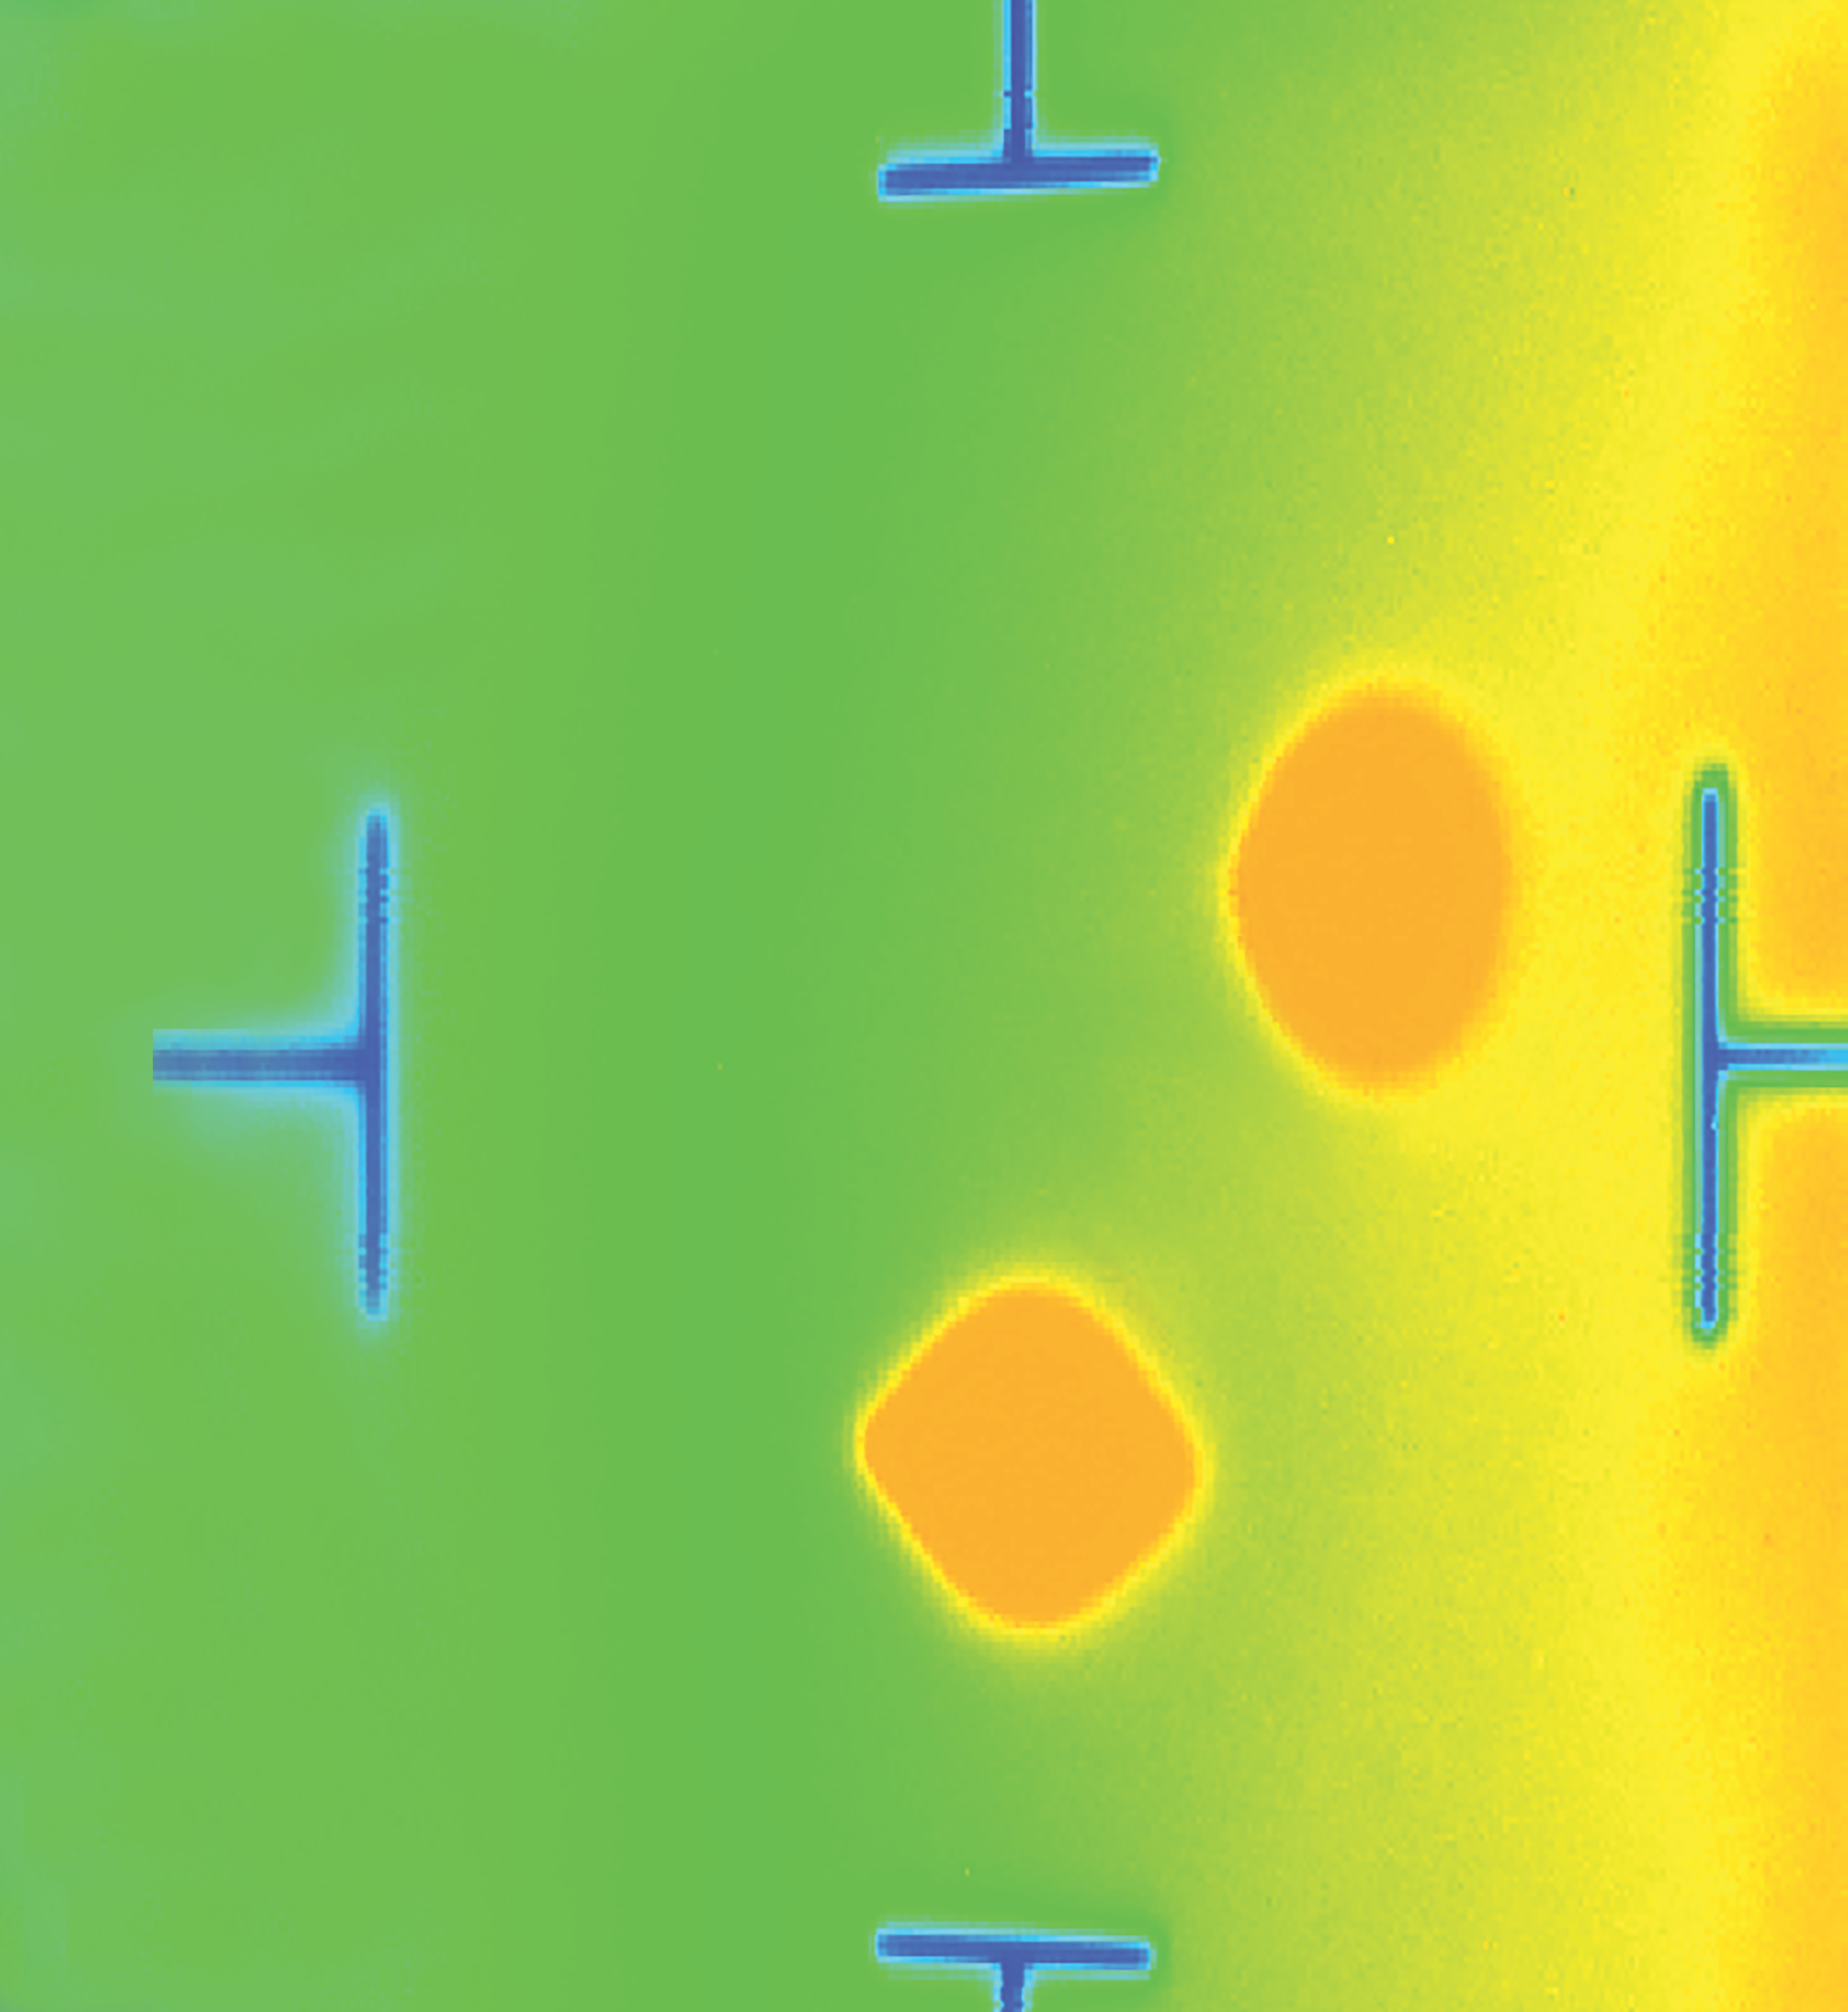 Image of a LHC beam screen recorded on 10 September 2008, showing two spots corresponding to the successful circulation of protons once around the machine (Image: CERN)